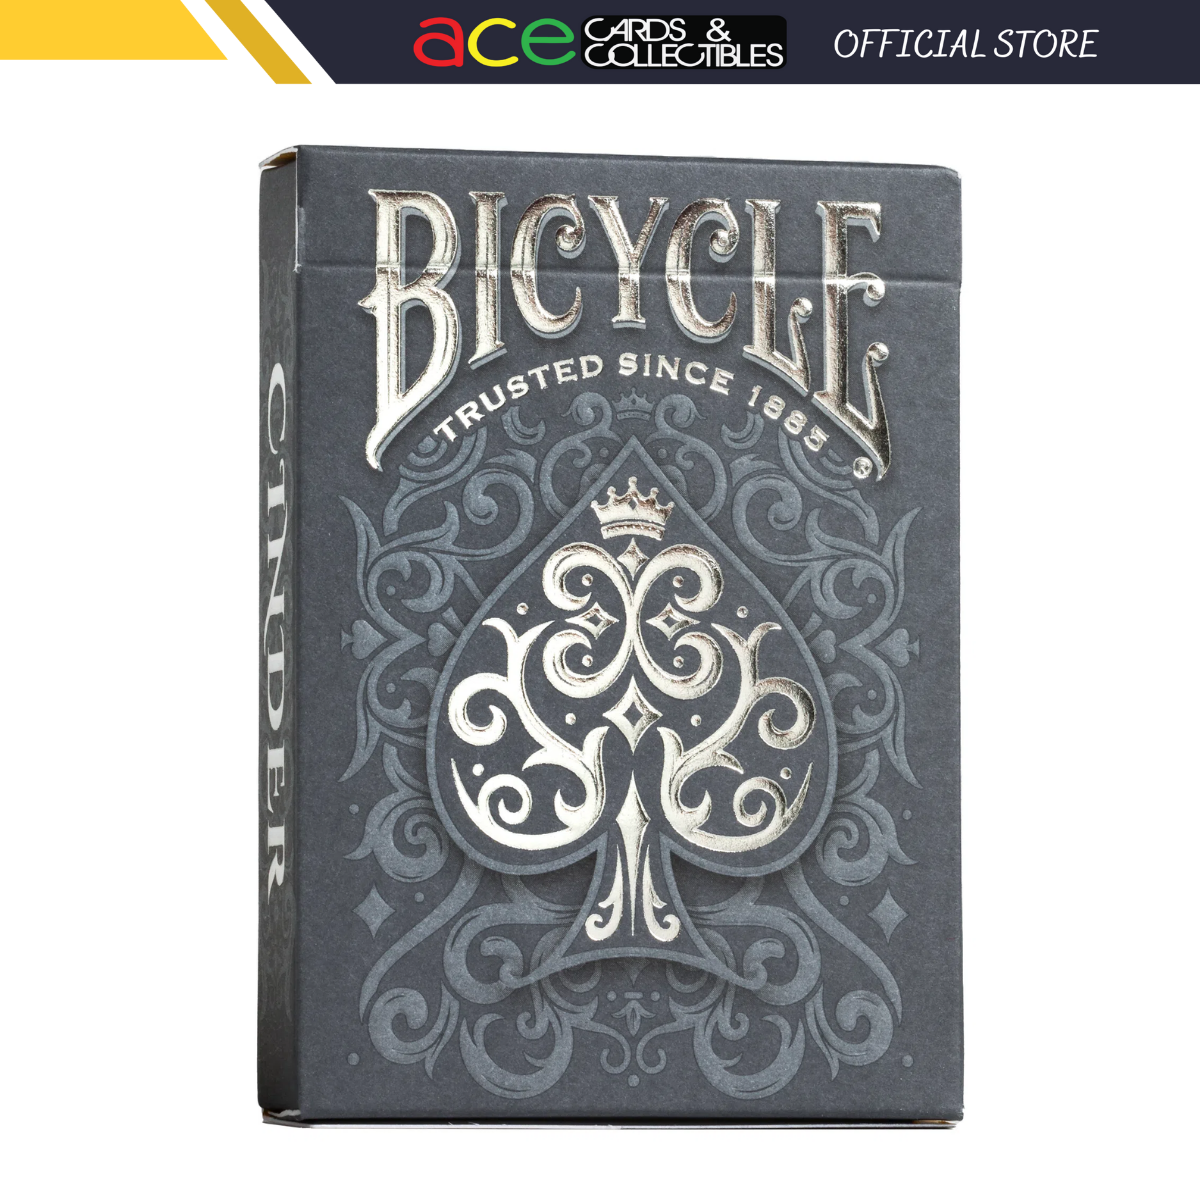 Bicycle Cinder Playing Cards-United States Playing Cards Company-Ace Cards &amp; Collectibles